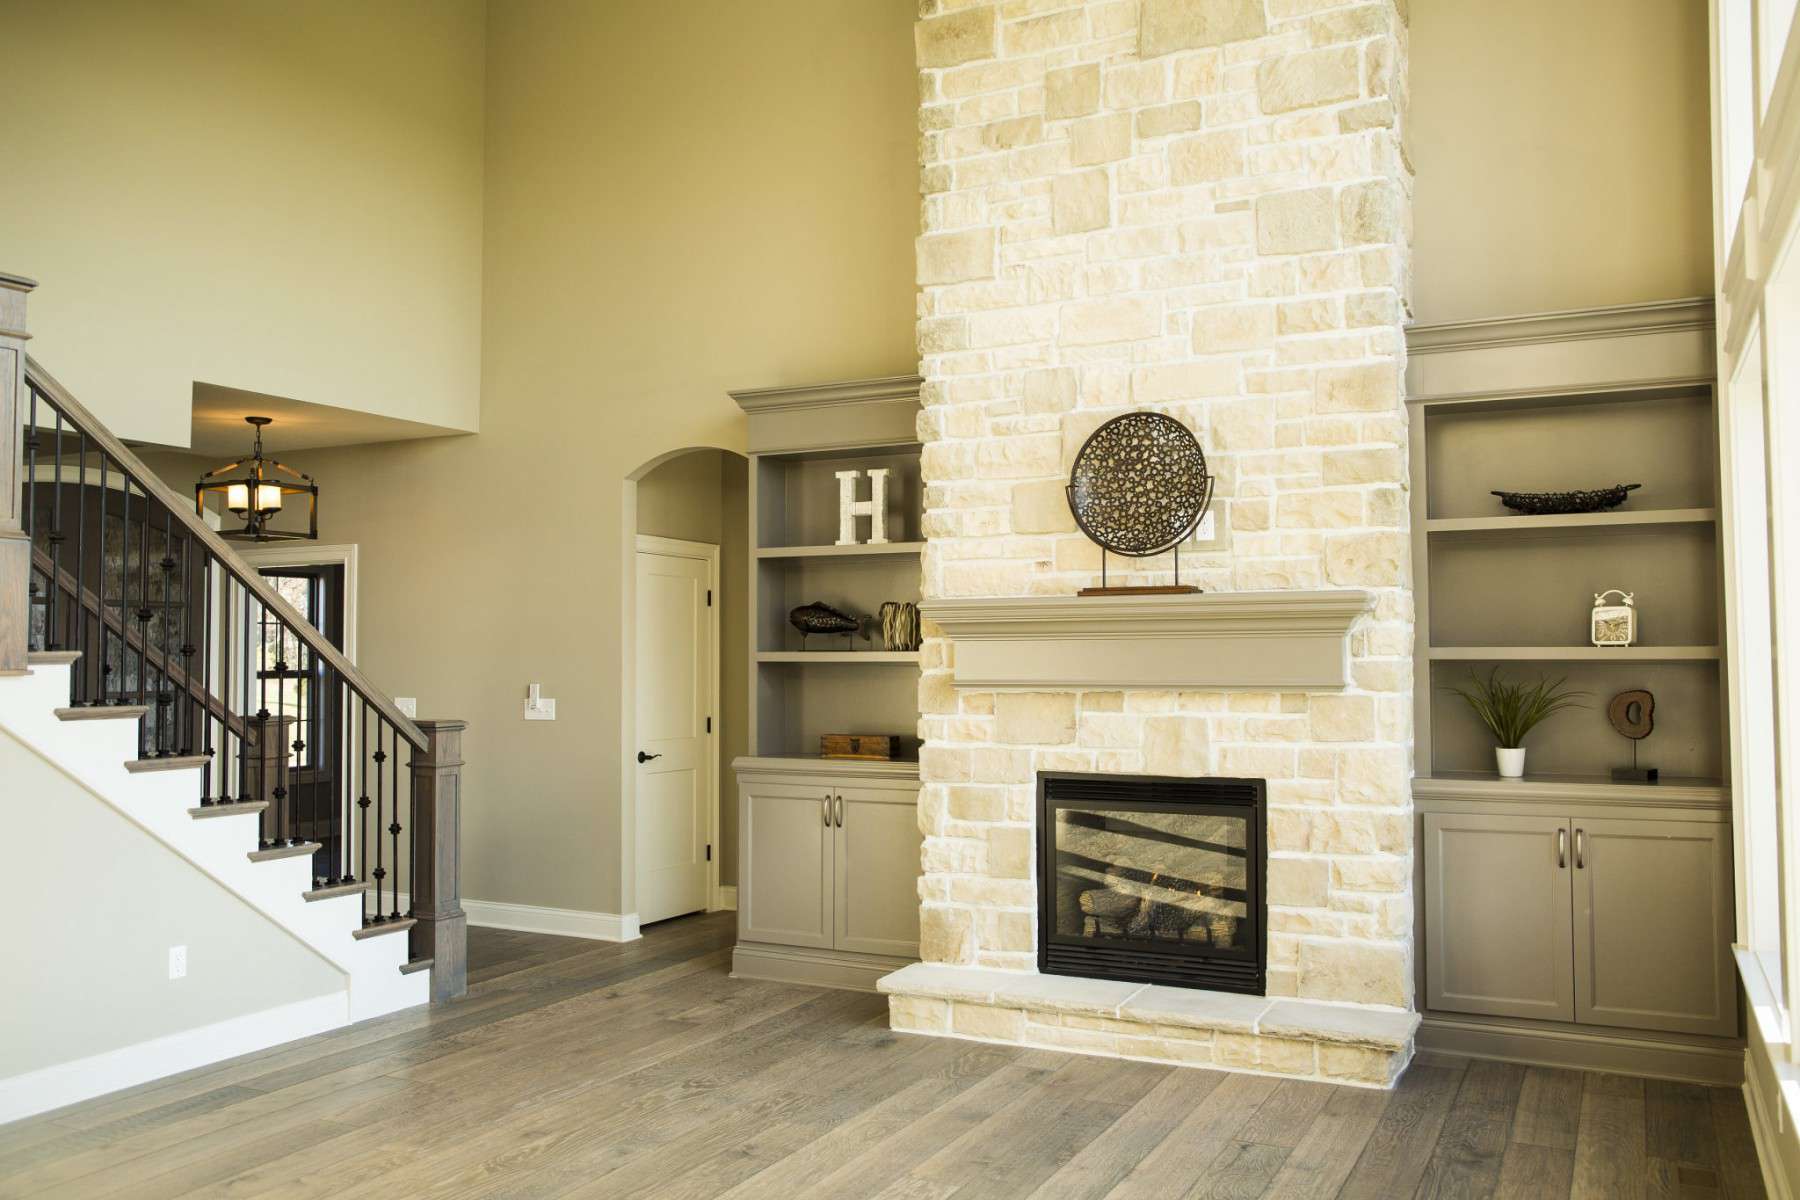 Decorated Shelves & Fireplace by Hansman Custom Homes in Mid-Missouri